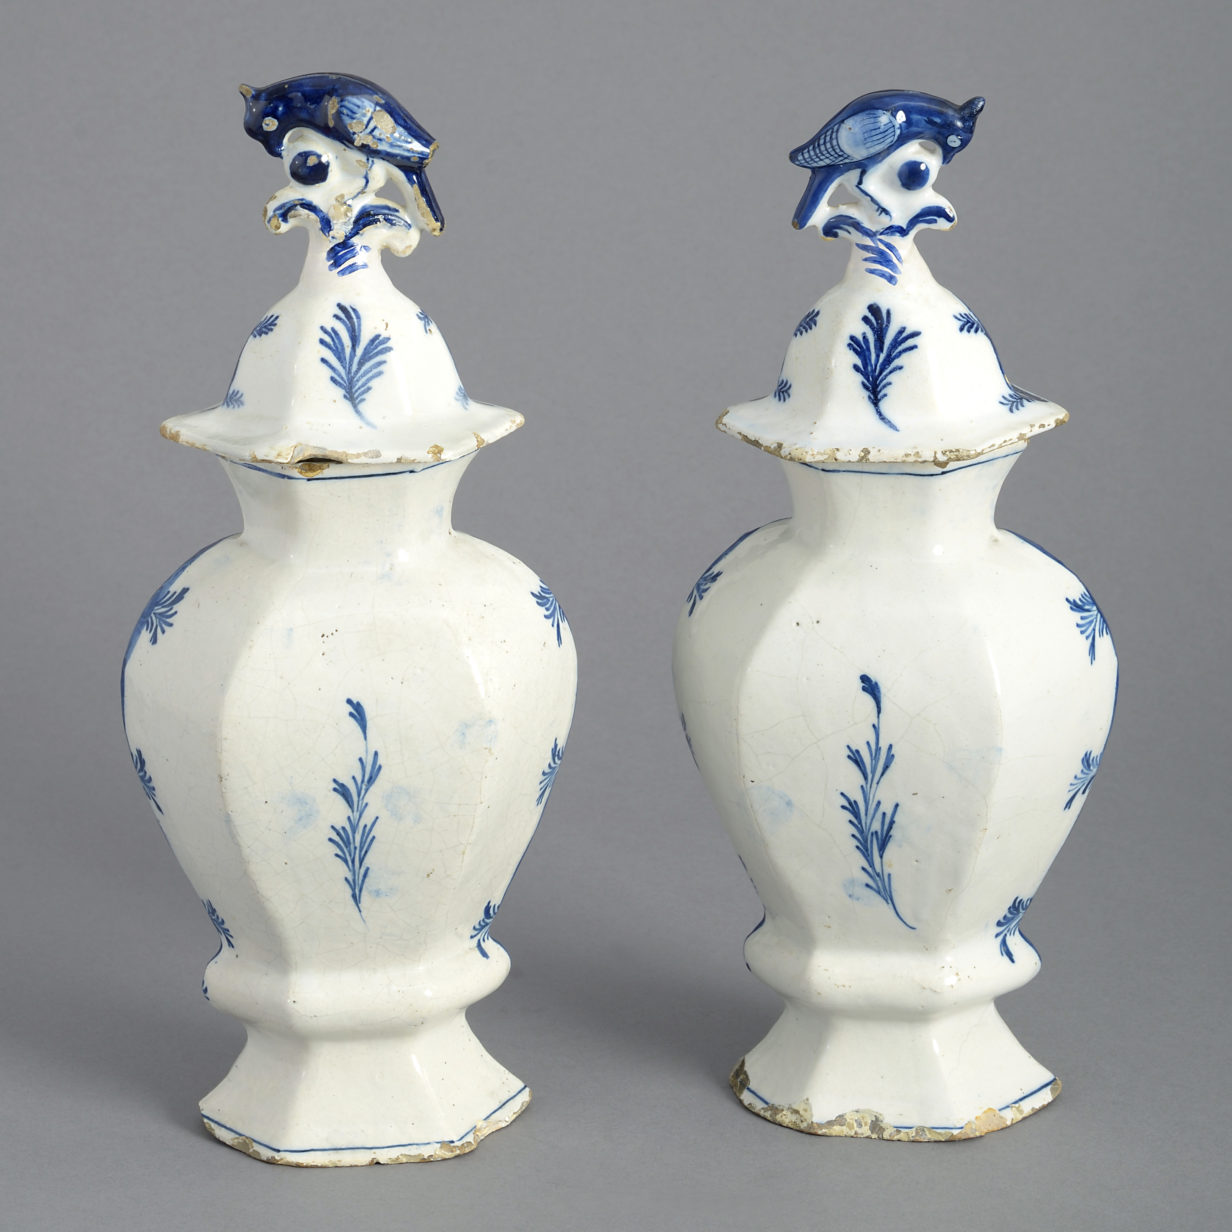 Pair of 18th century blue & white delft vases and covers